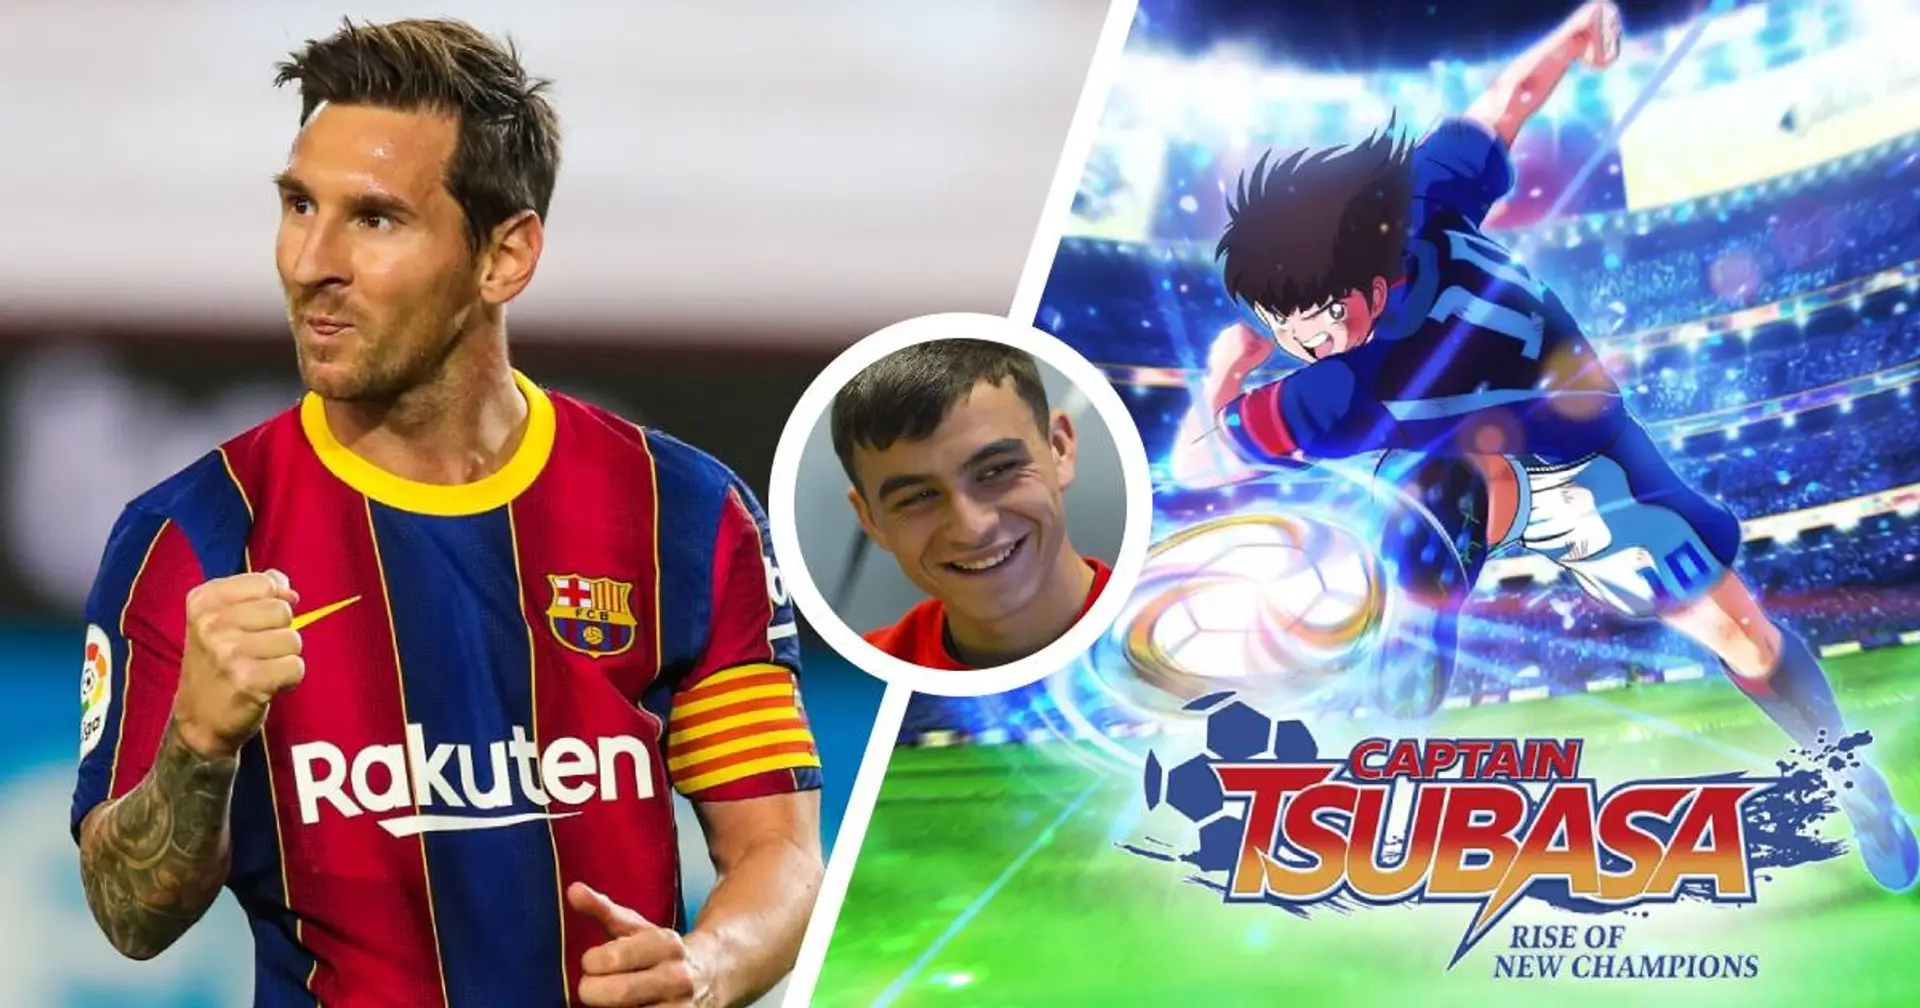 'To learn with Messi is a luxury': Pedri compares Leo to Captain Tsubasa characters